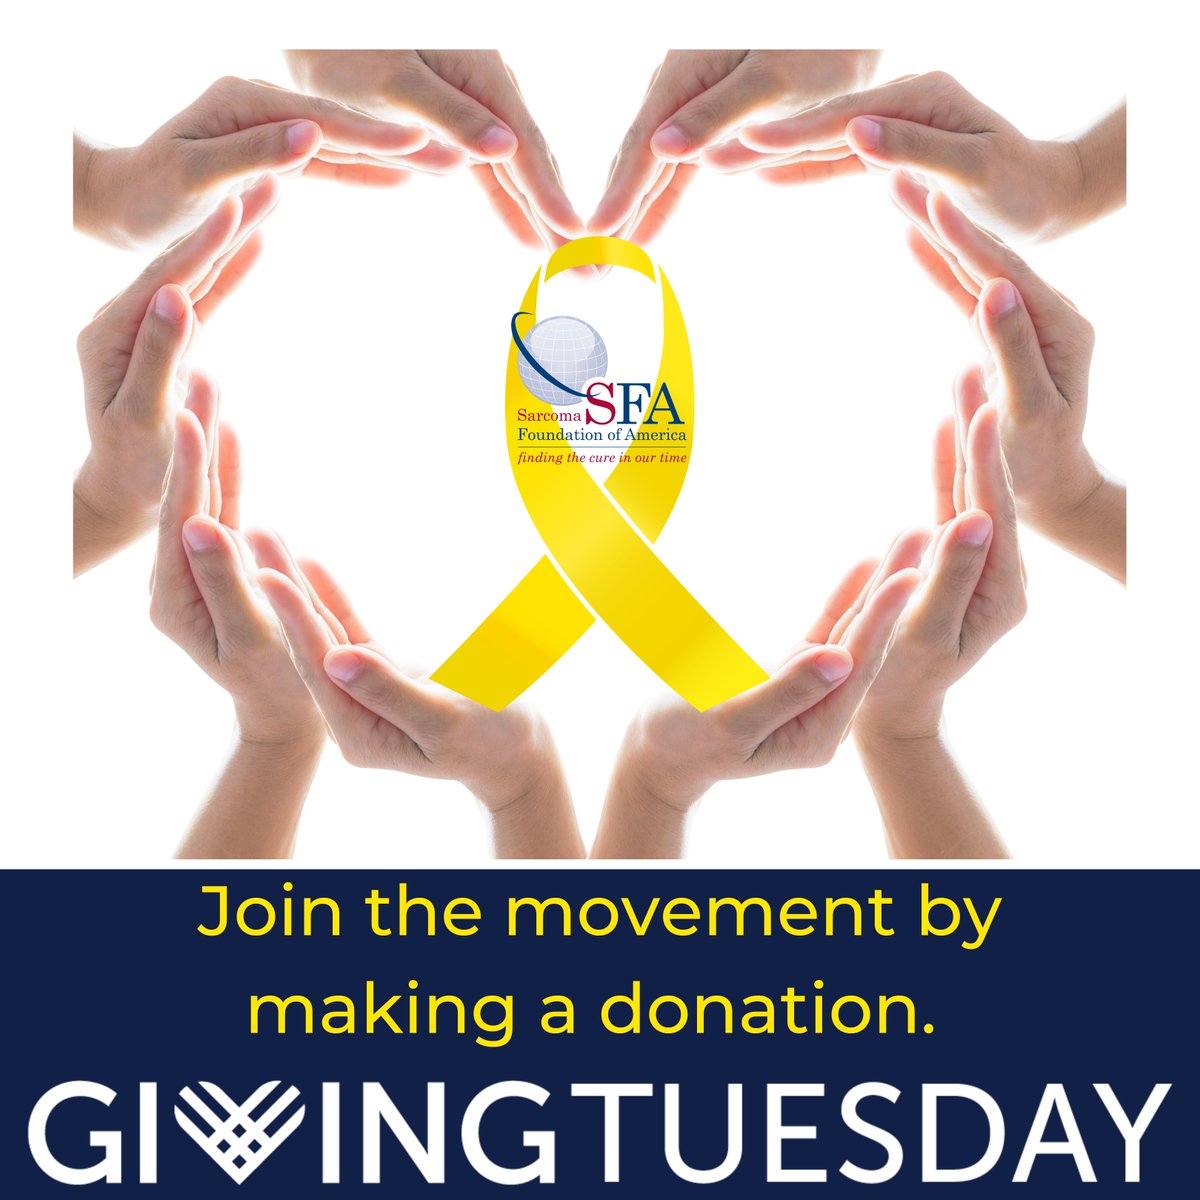 Happy #GivingTuesday! SFA has as its primary purpose to increase the focus and attention on sarcoma research and we need your generosity to help find new and better therapies. 

p2p.onecause.com/sfagivingtuesd…